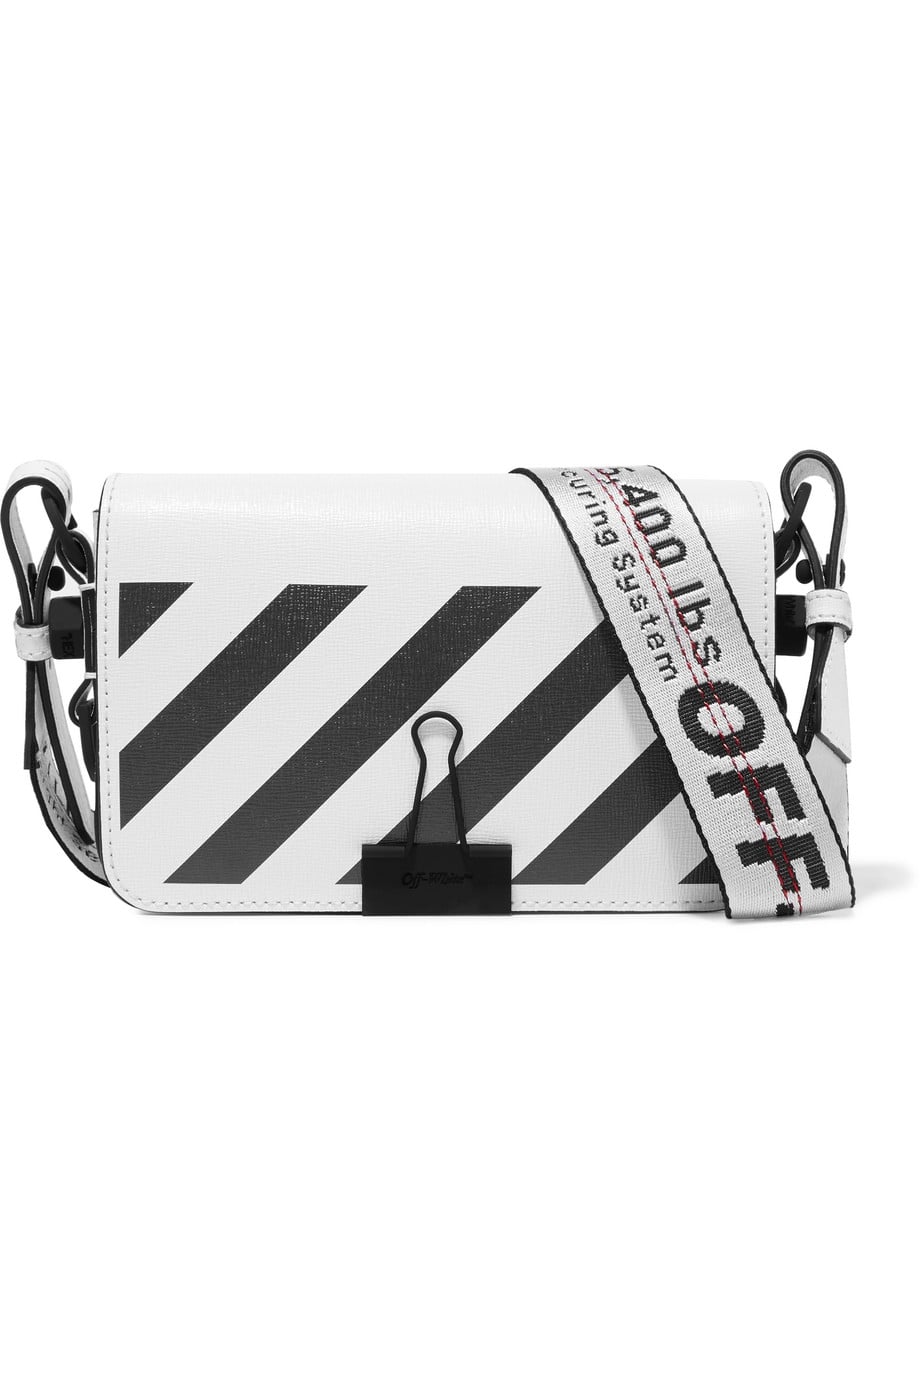 Off-White Striped textured-leather shoulder bag (53,330 PHP) ❤ liked on  Polyvore featuring bags, handbags, shoulder bags, blac…